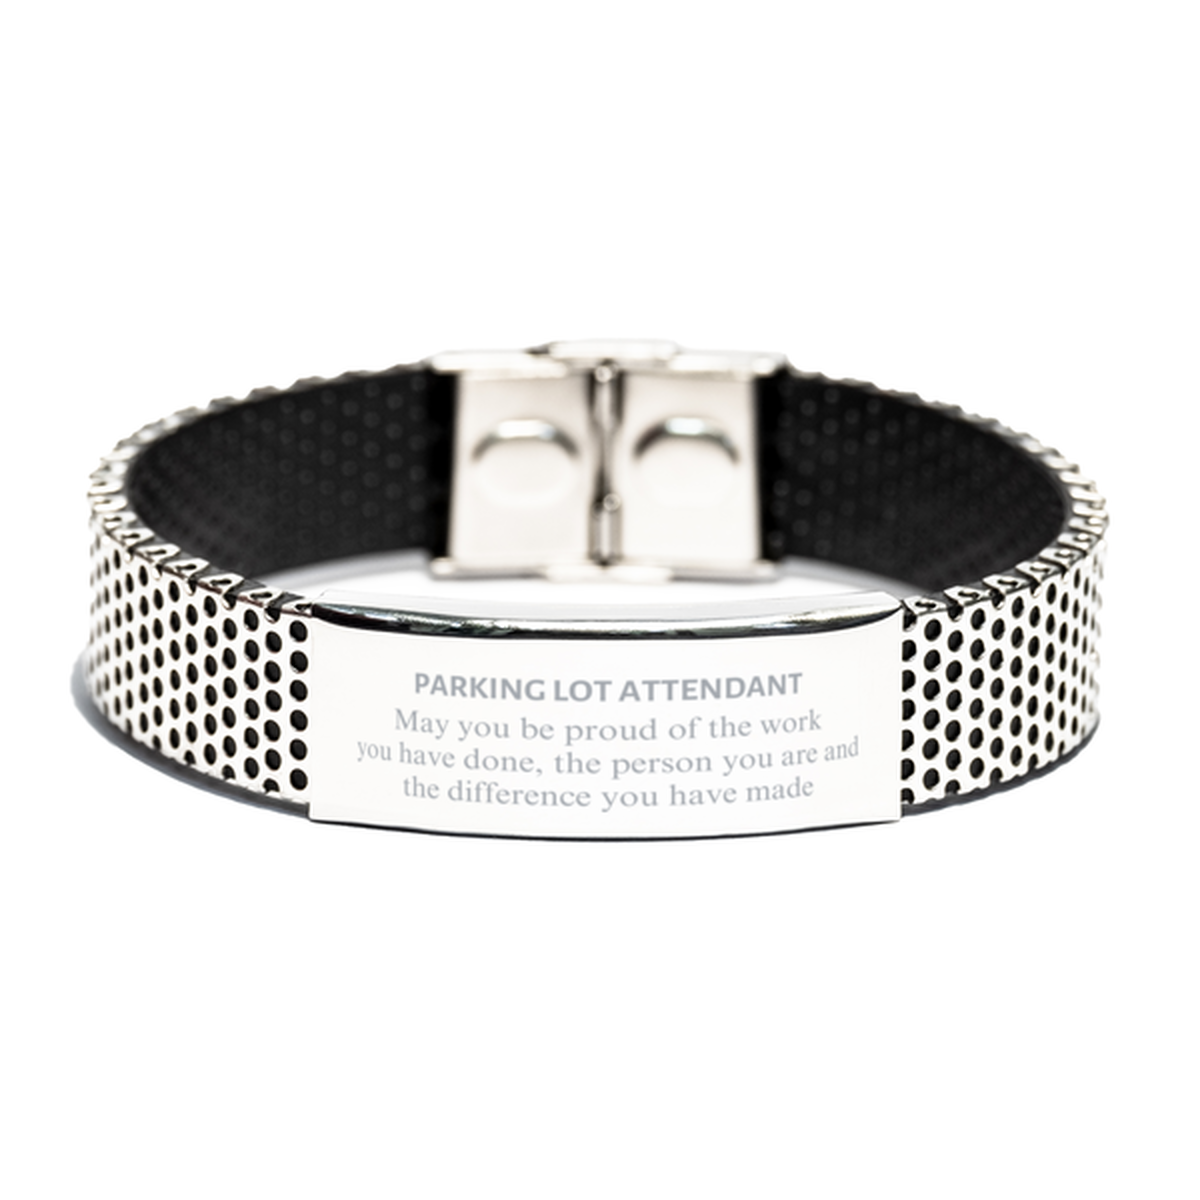 Parking Lot Attendant May you be proud of the work you have done, Retirement Parking Lot Attendant Stainless Steel Bracelet for Colleague Appreciation Gifts Amazing for Parking Lot Attendant